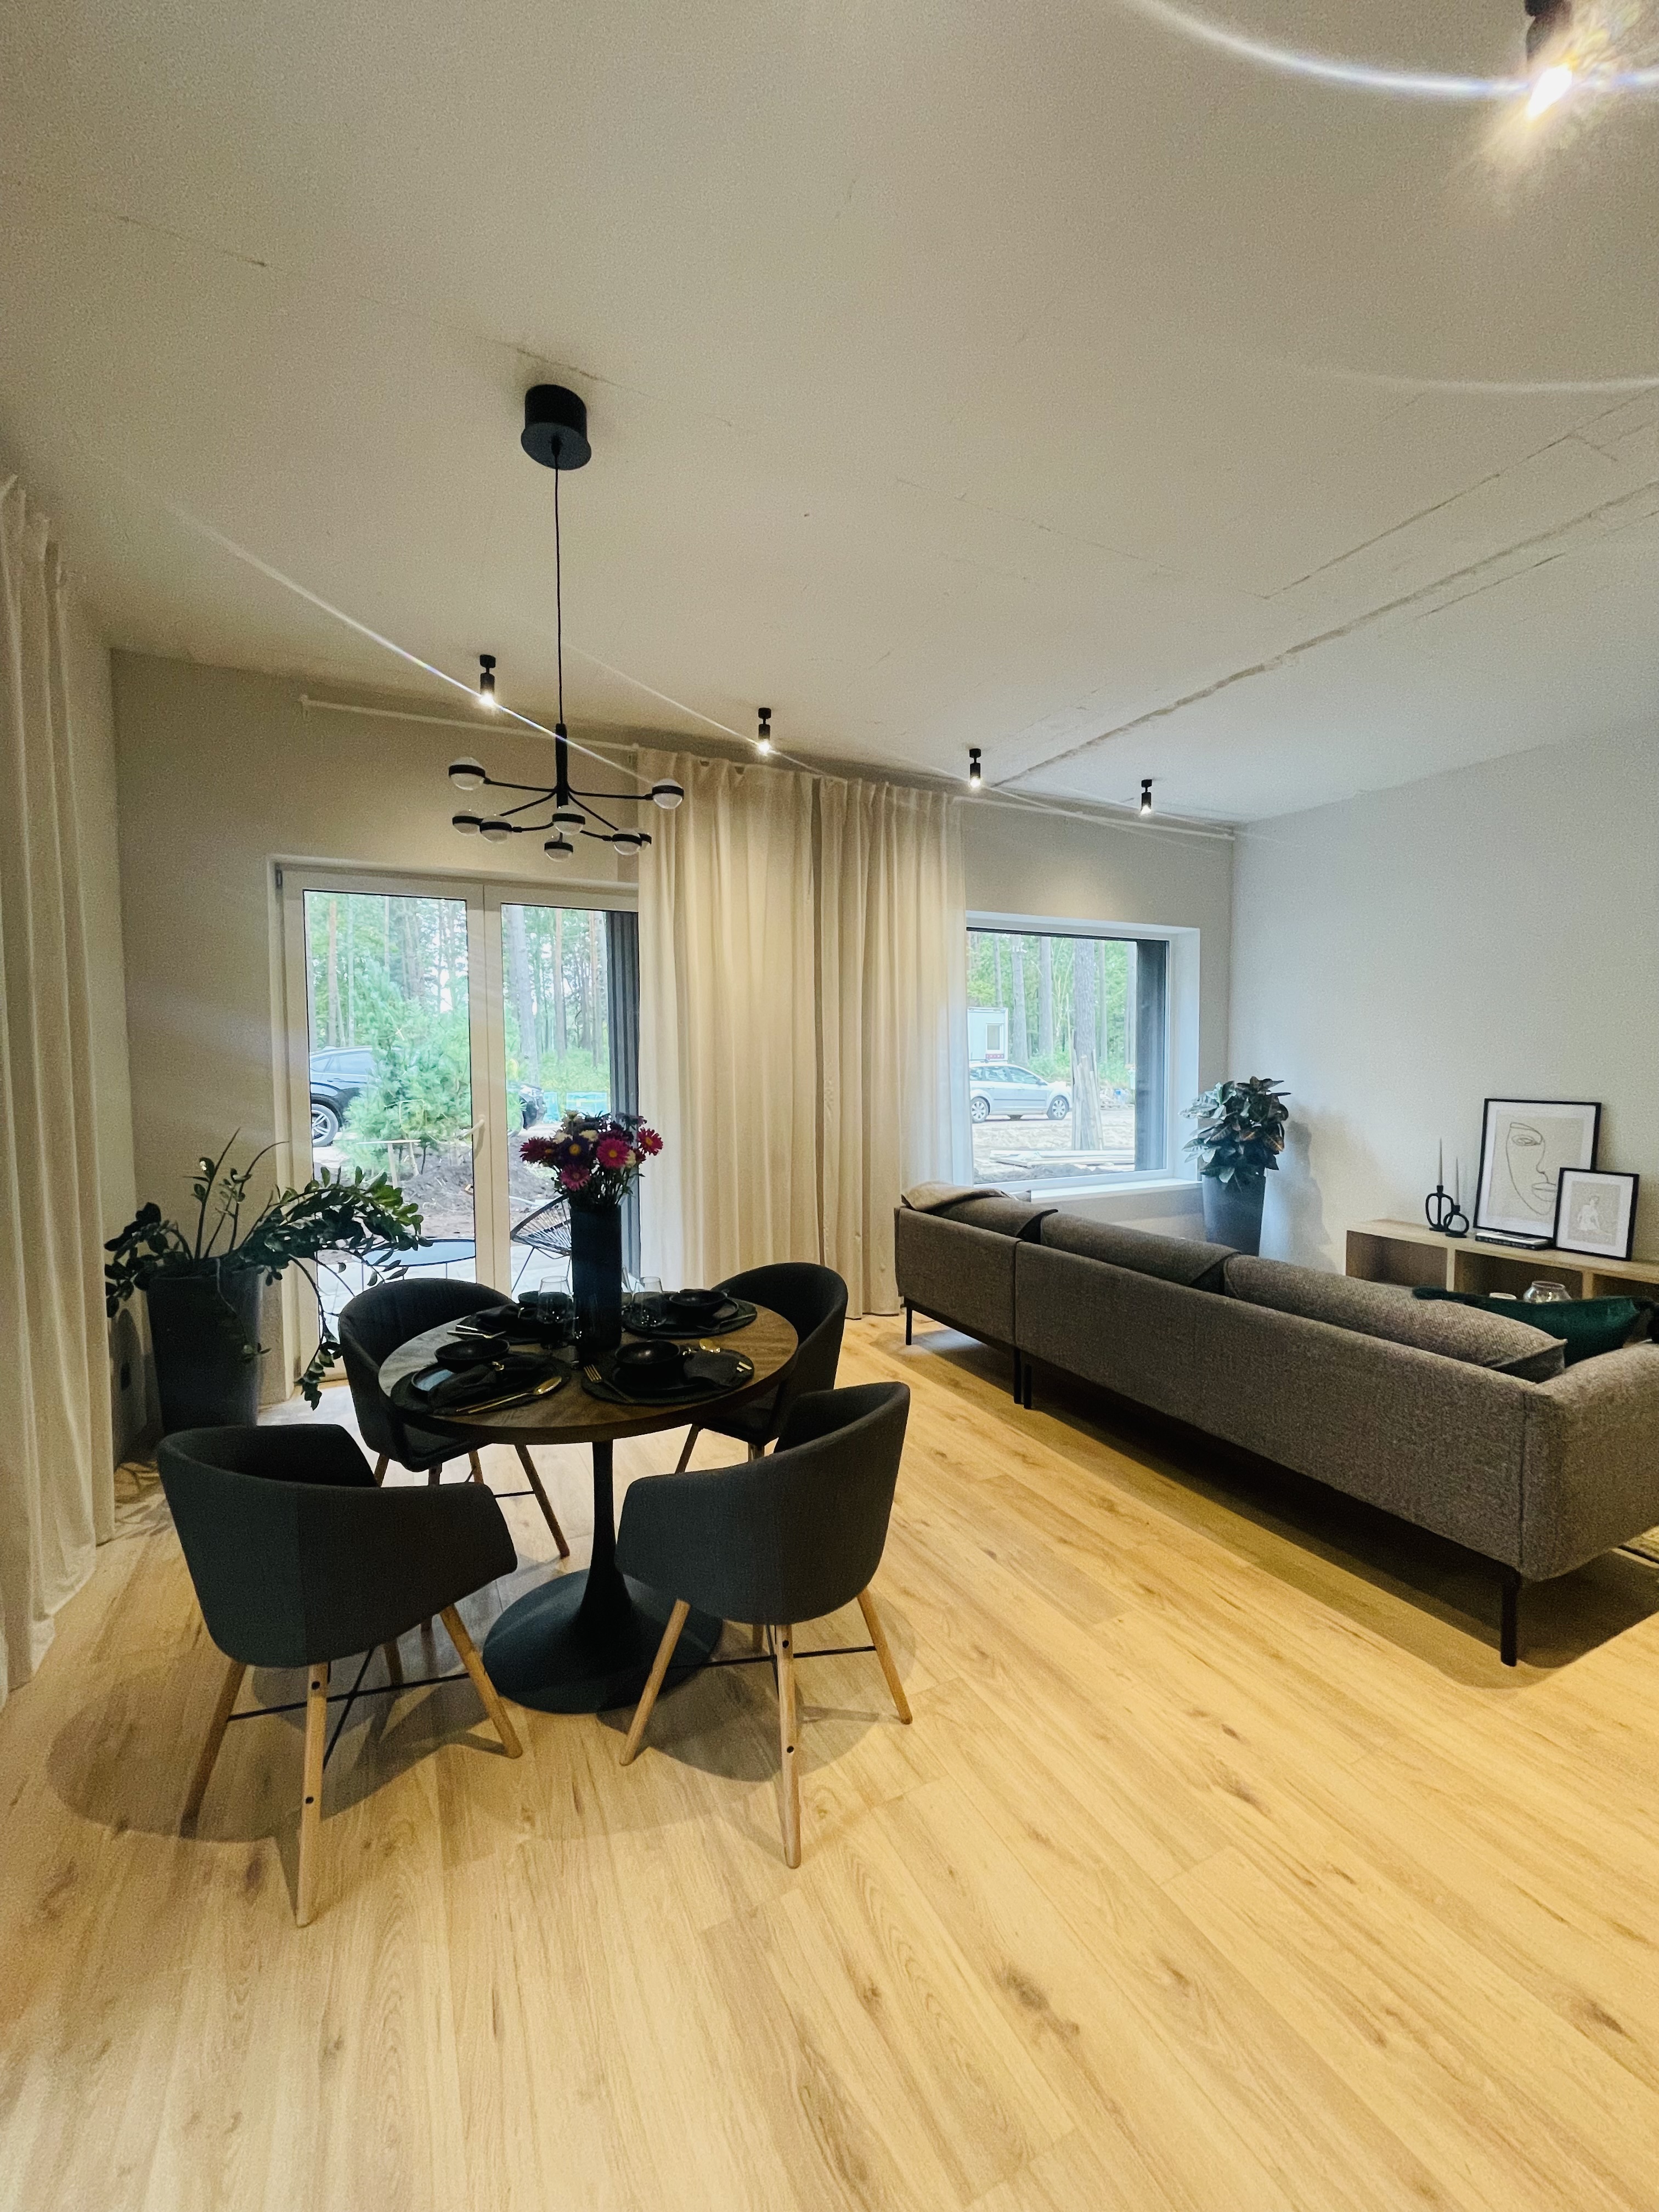 Apartment for rent, Viestura street 2 - Image 1